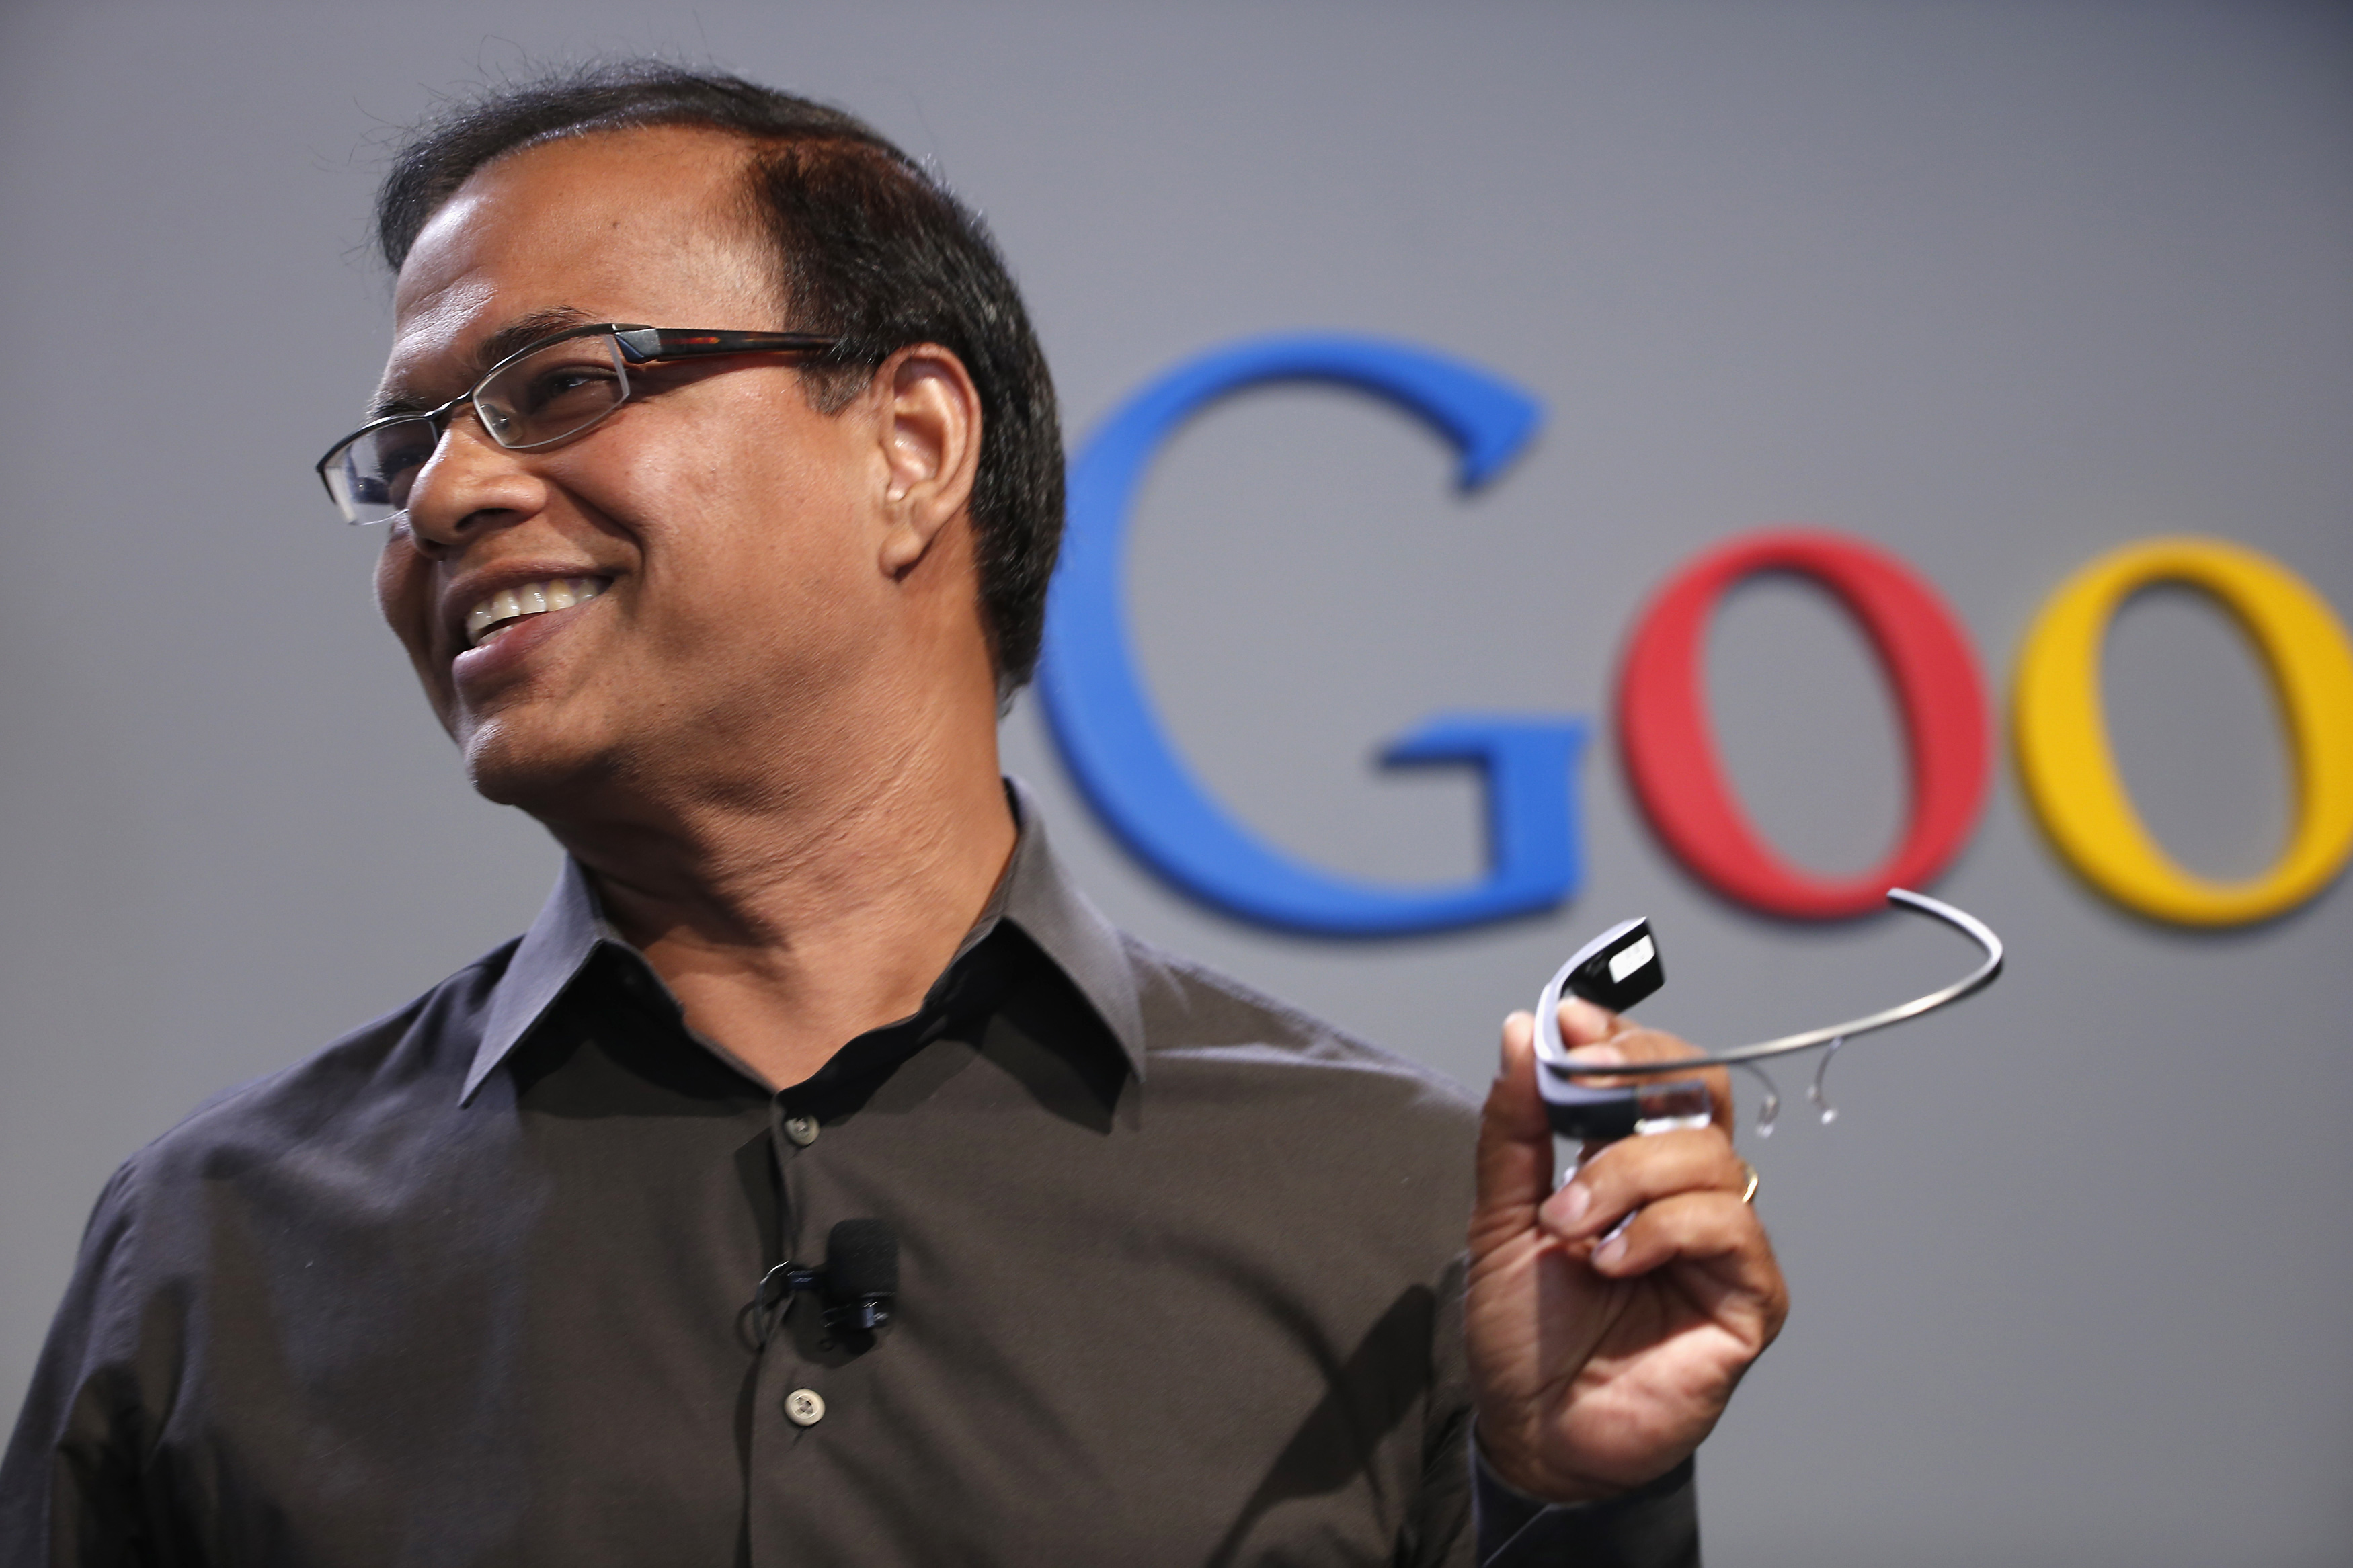 Amit Singhal, senior vice president of search at Google, holds a Google Glass as he speaks at the garage where the company was founded on Google's 15th anniversary in Menlo Park, California September 26, 2013 (REUTERS/Stephen Lam)